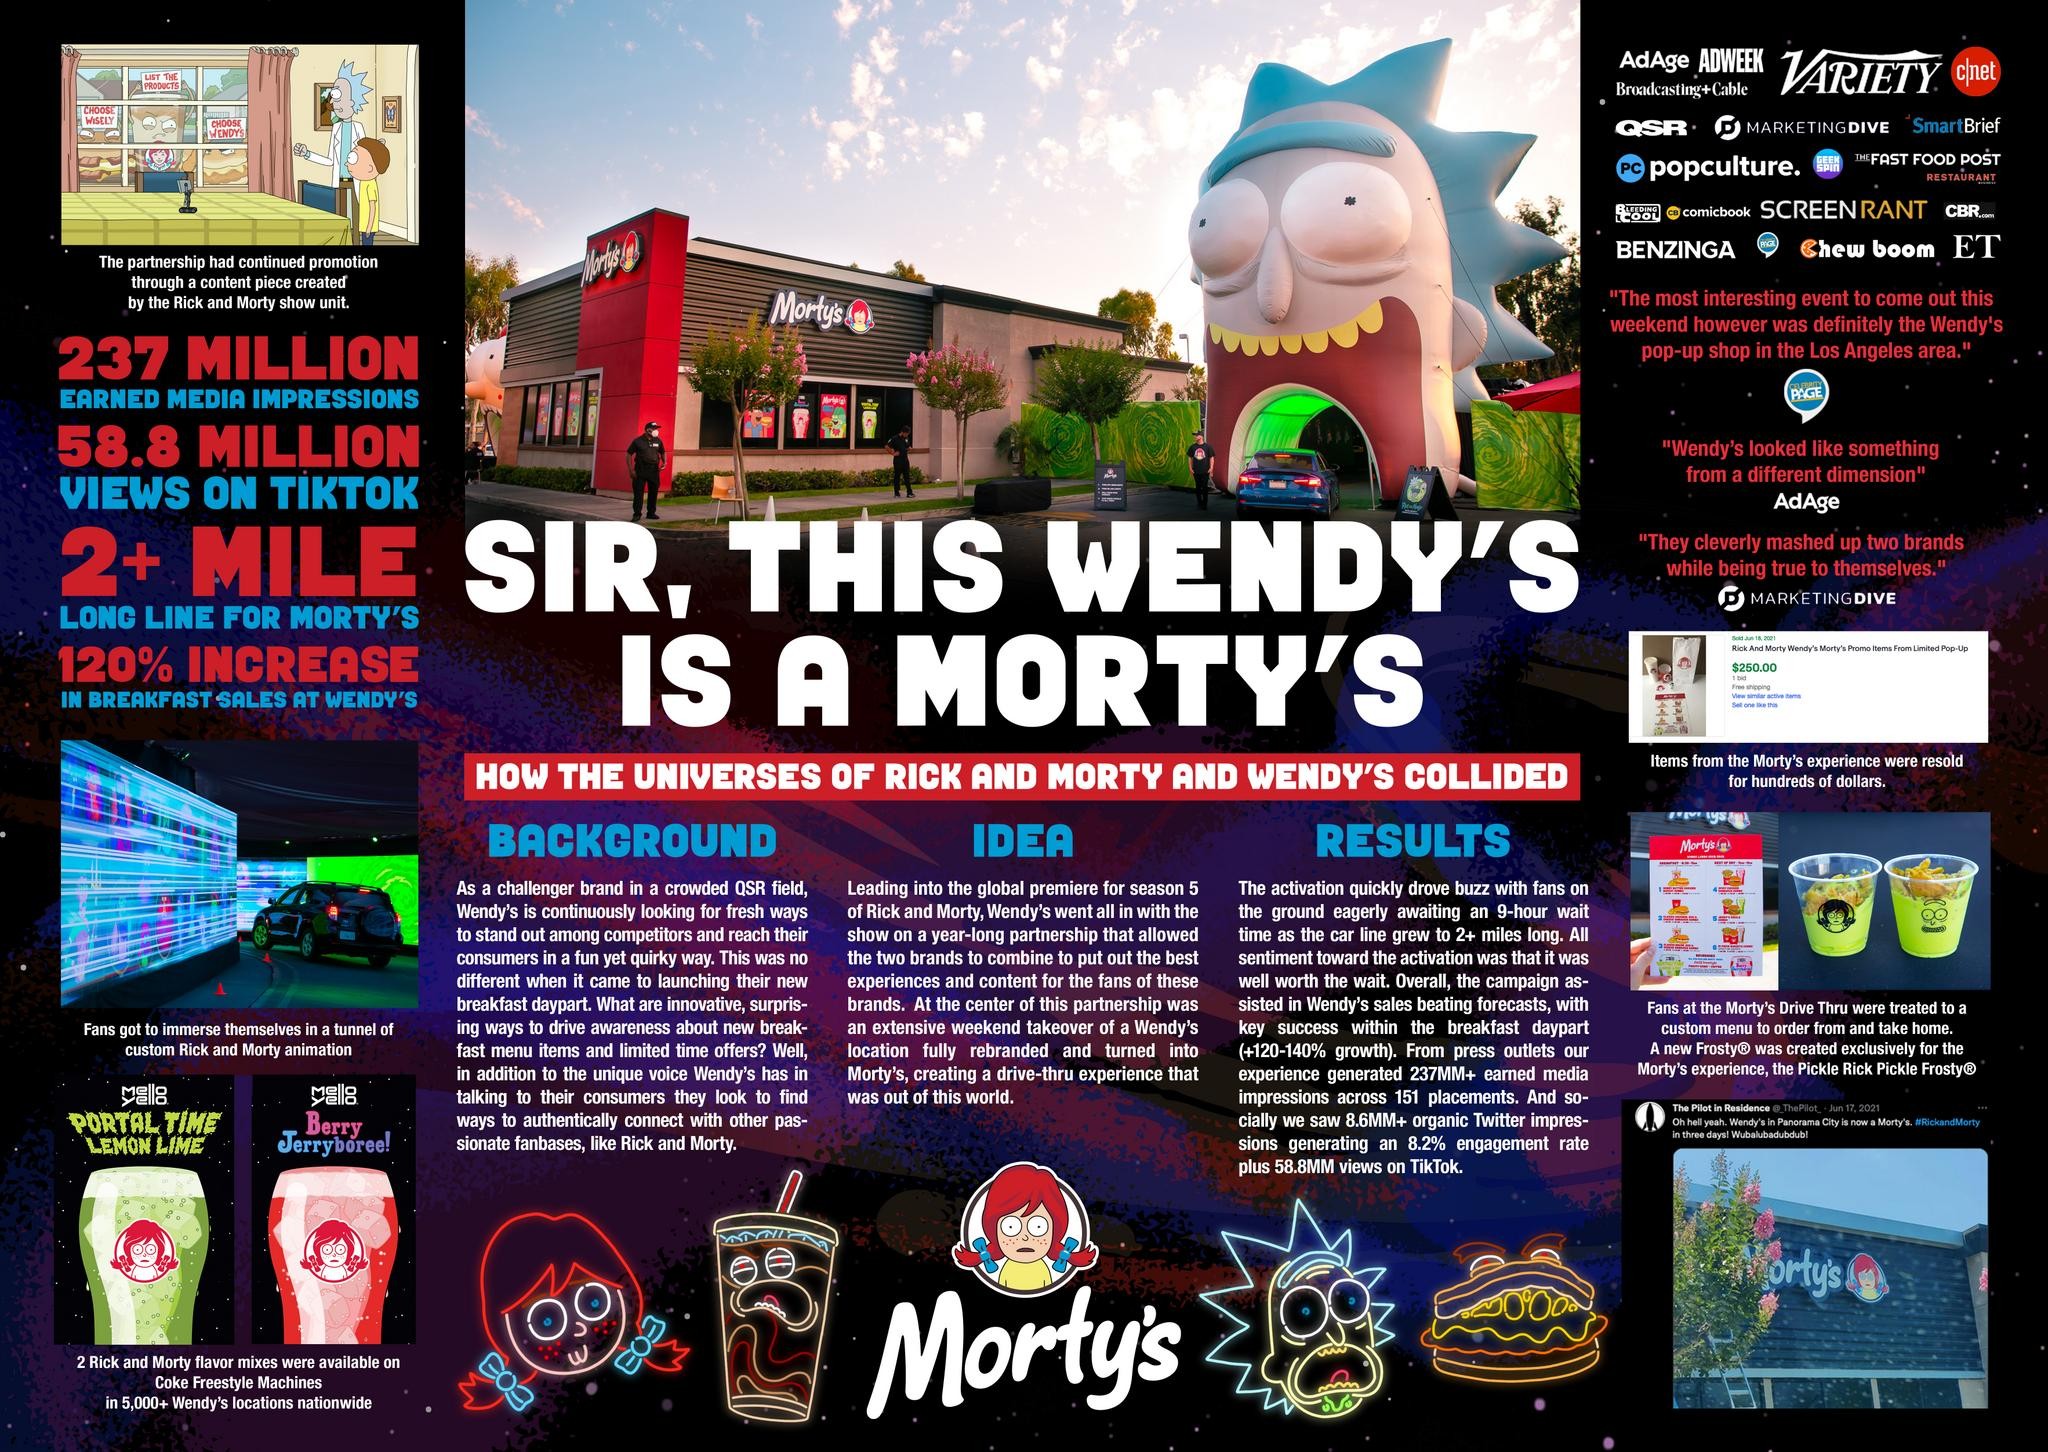 Sir, This Wendy's is a Morty's!